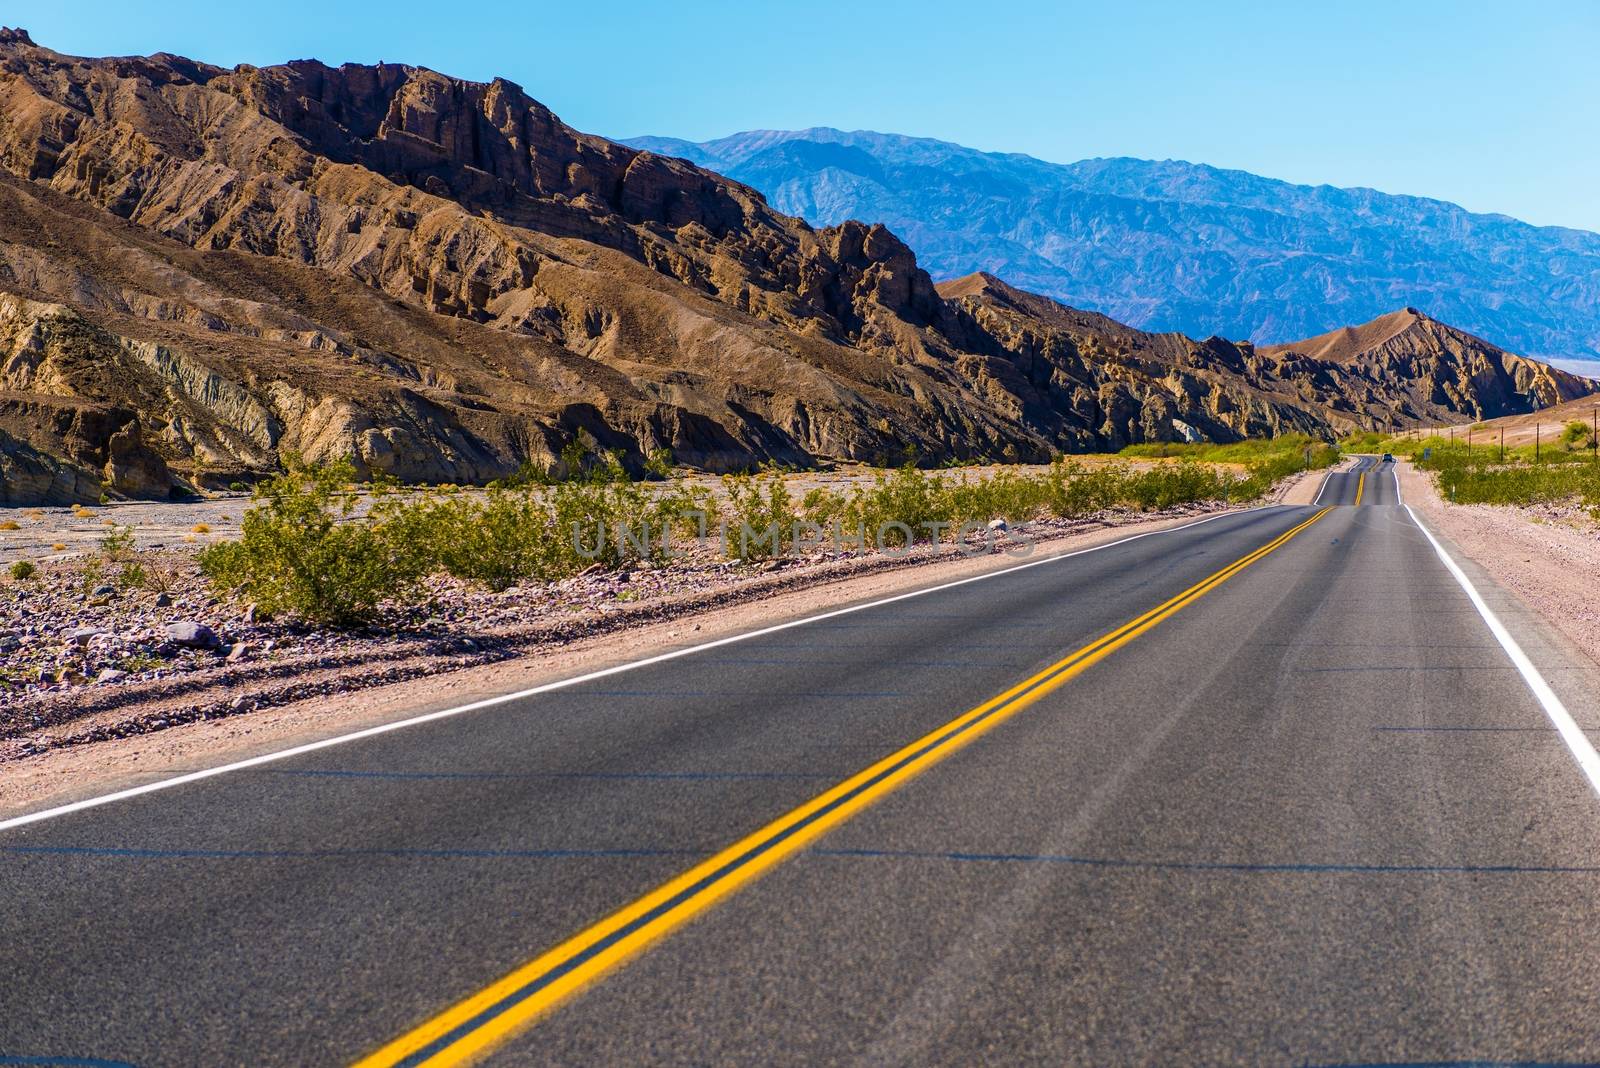 Southern California Desert Highway near Death Valley. United States.